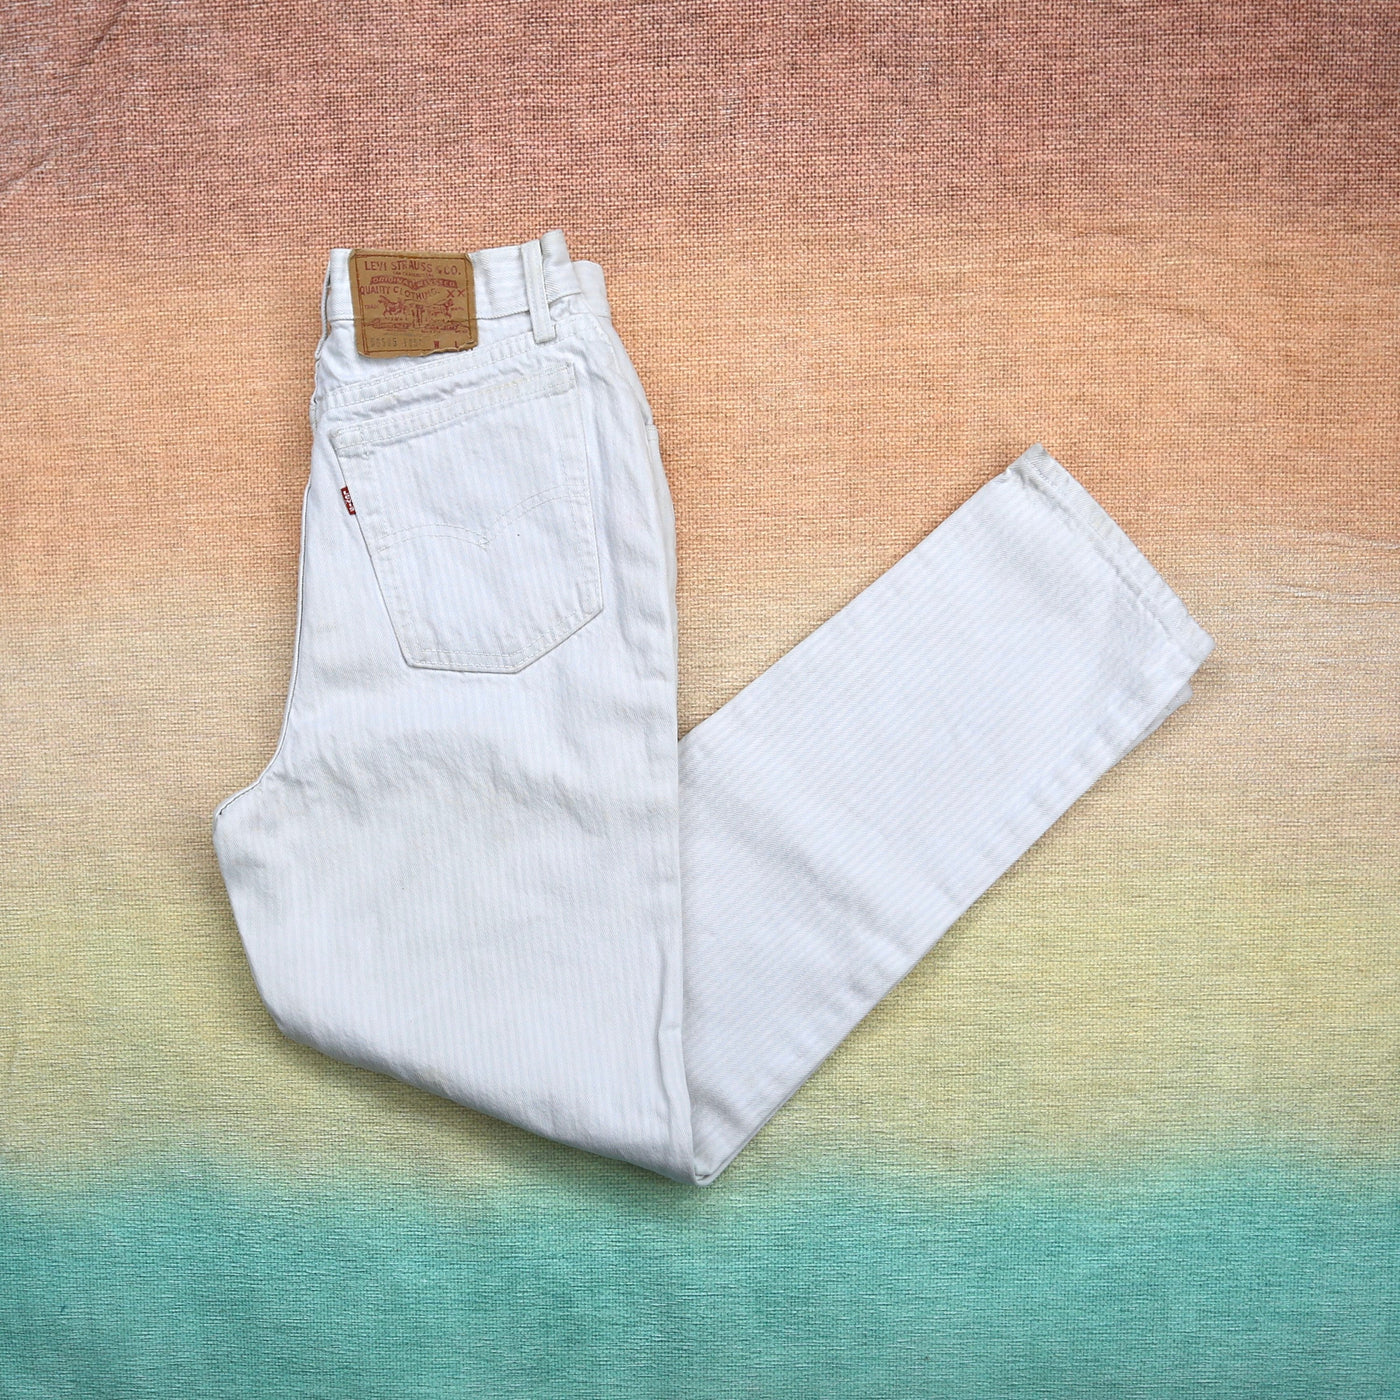 Vintage 505 White Pin Striped High Waisted Levis Jeans // Size 29